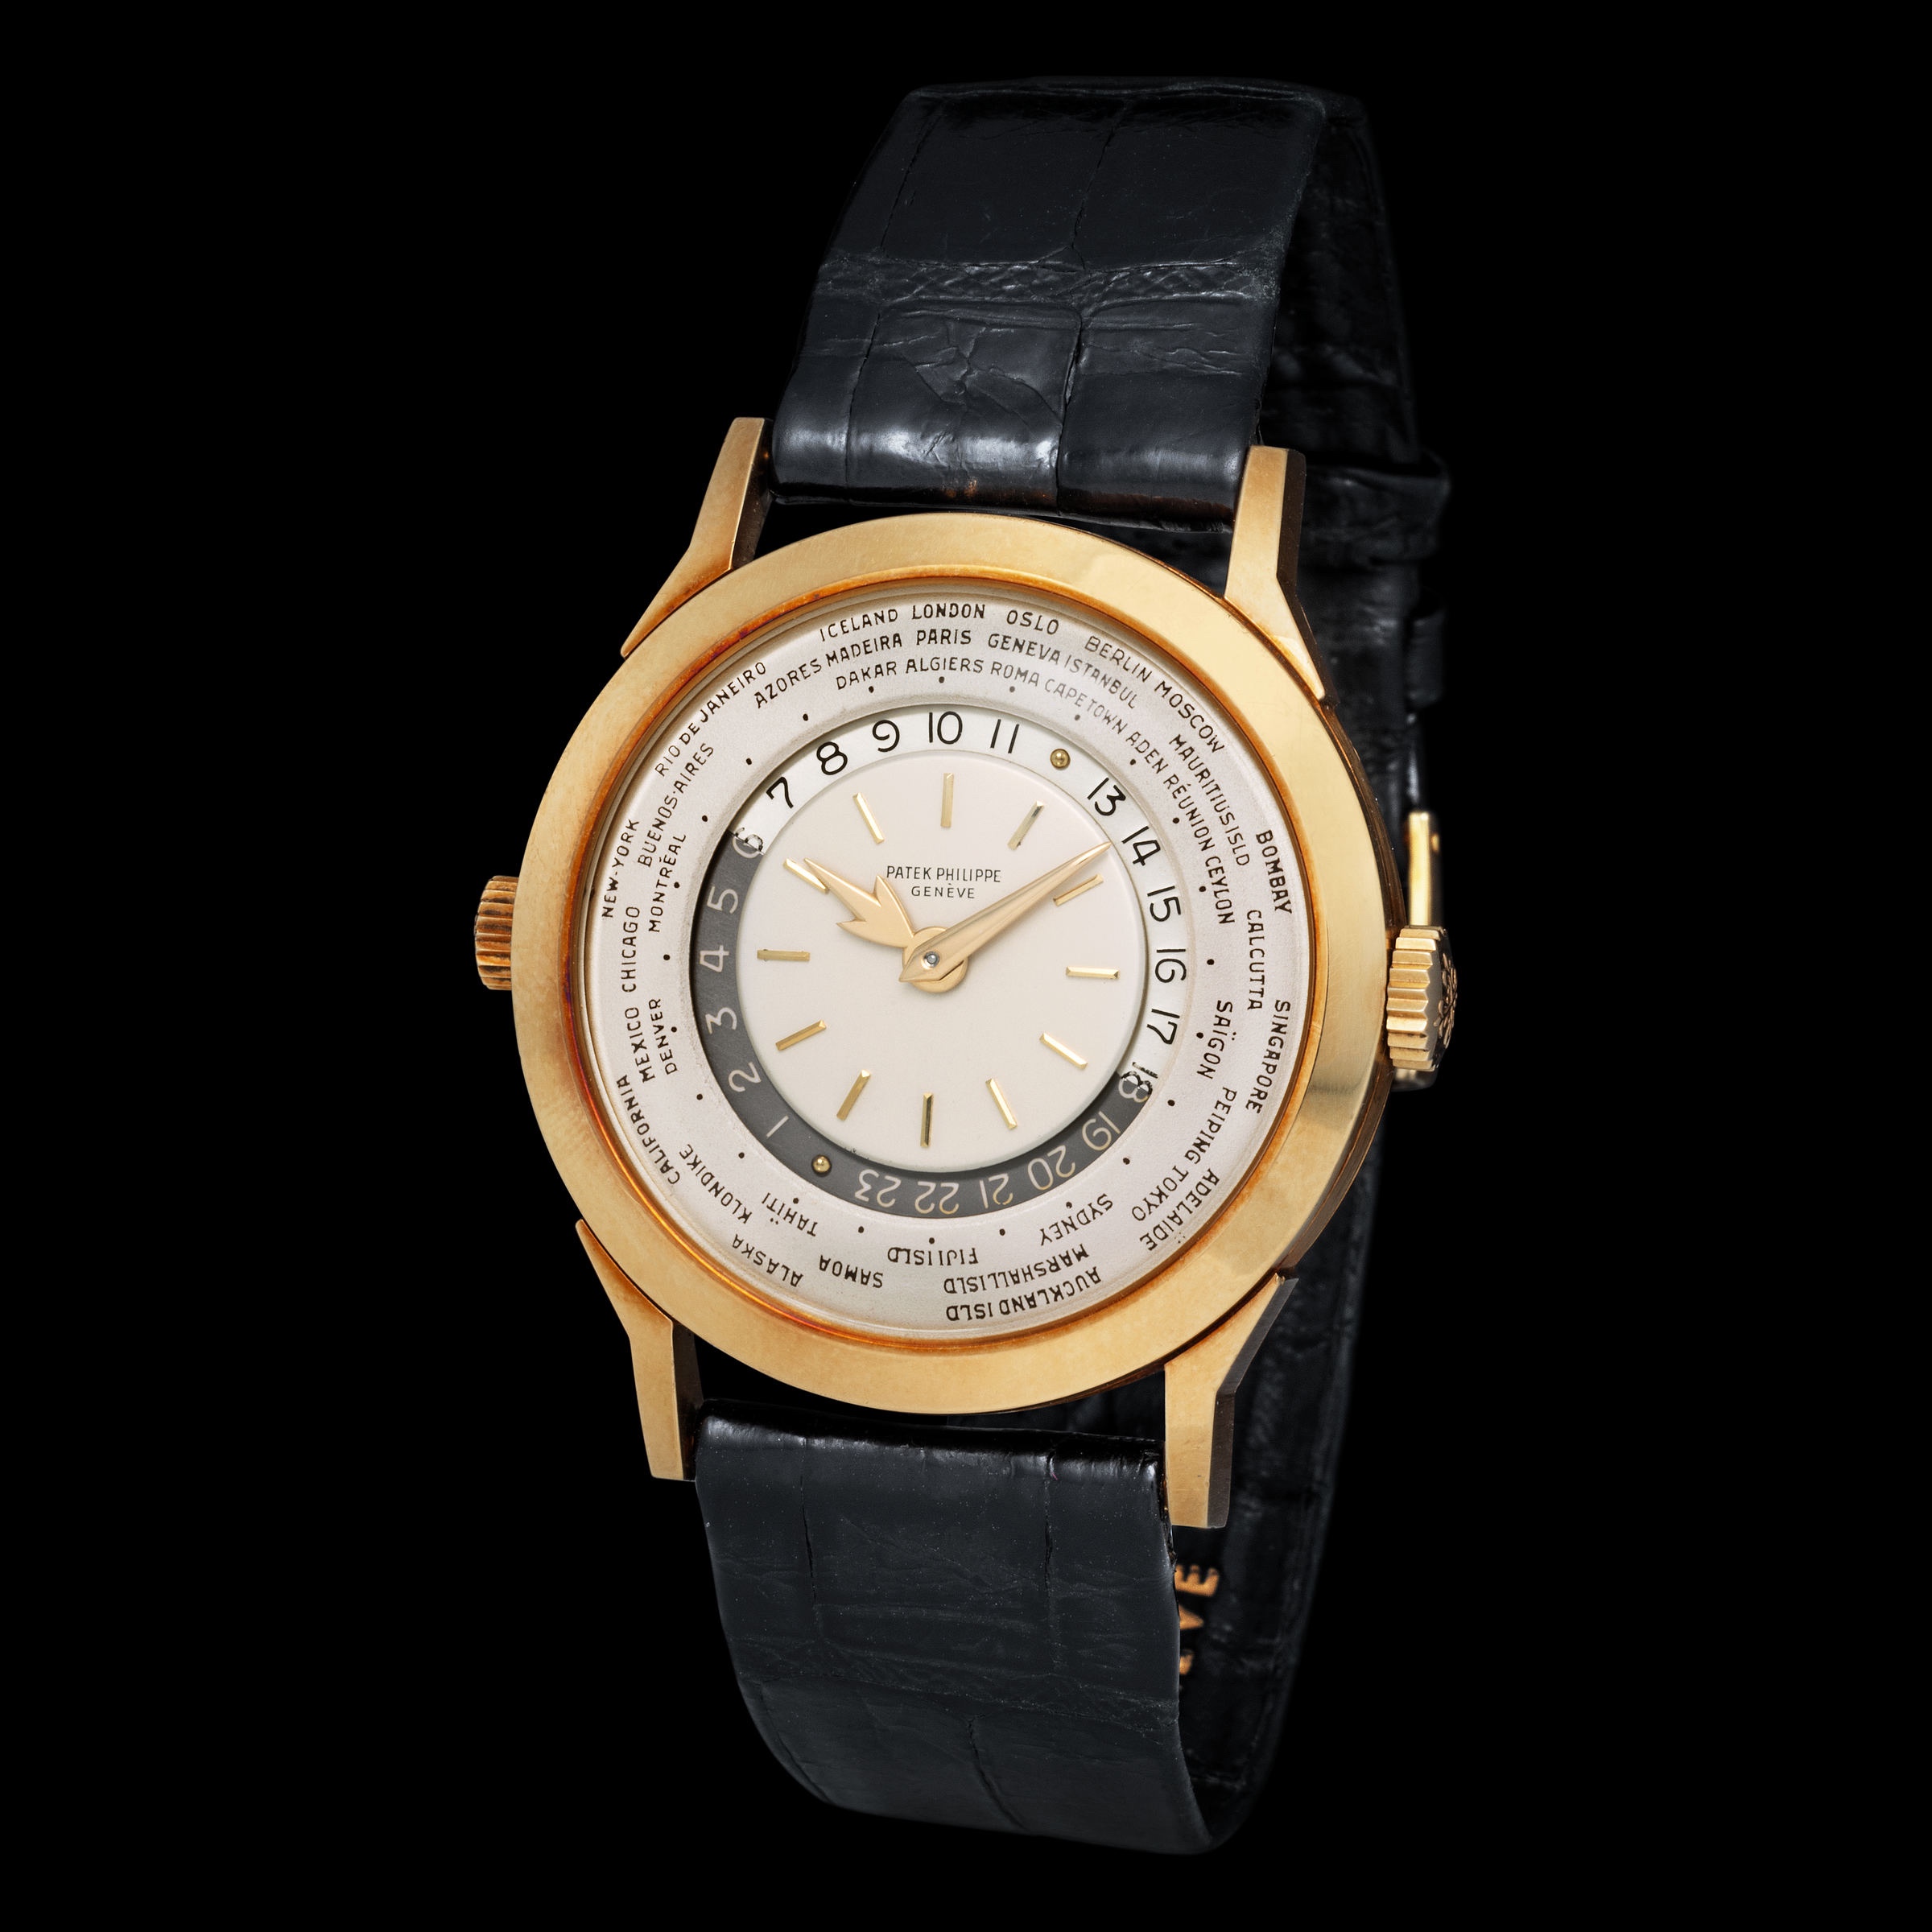 5 minutes with… A Patek Philippe Ref. 2523 in pink gold